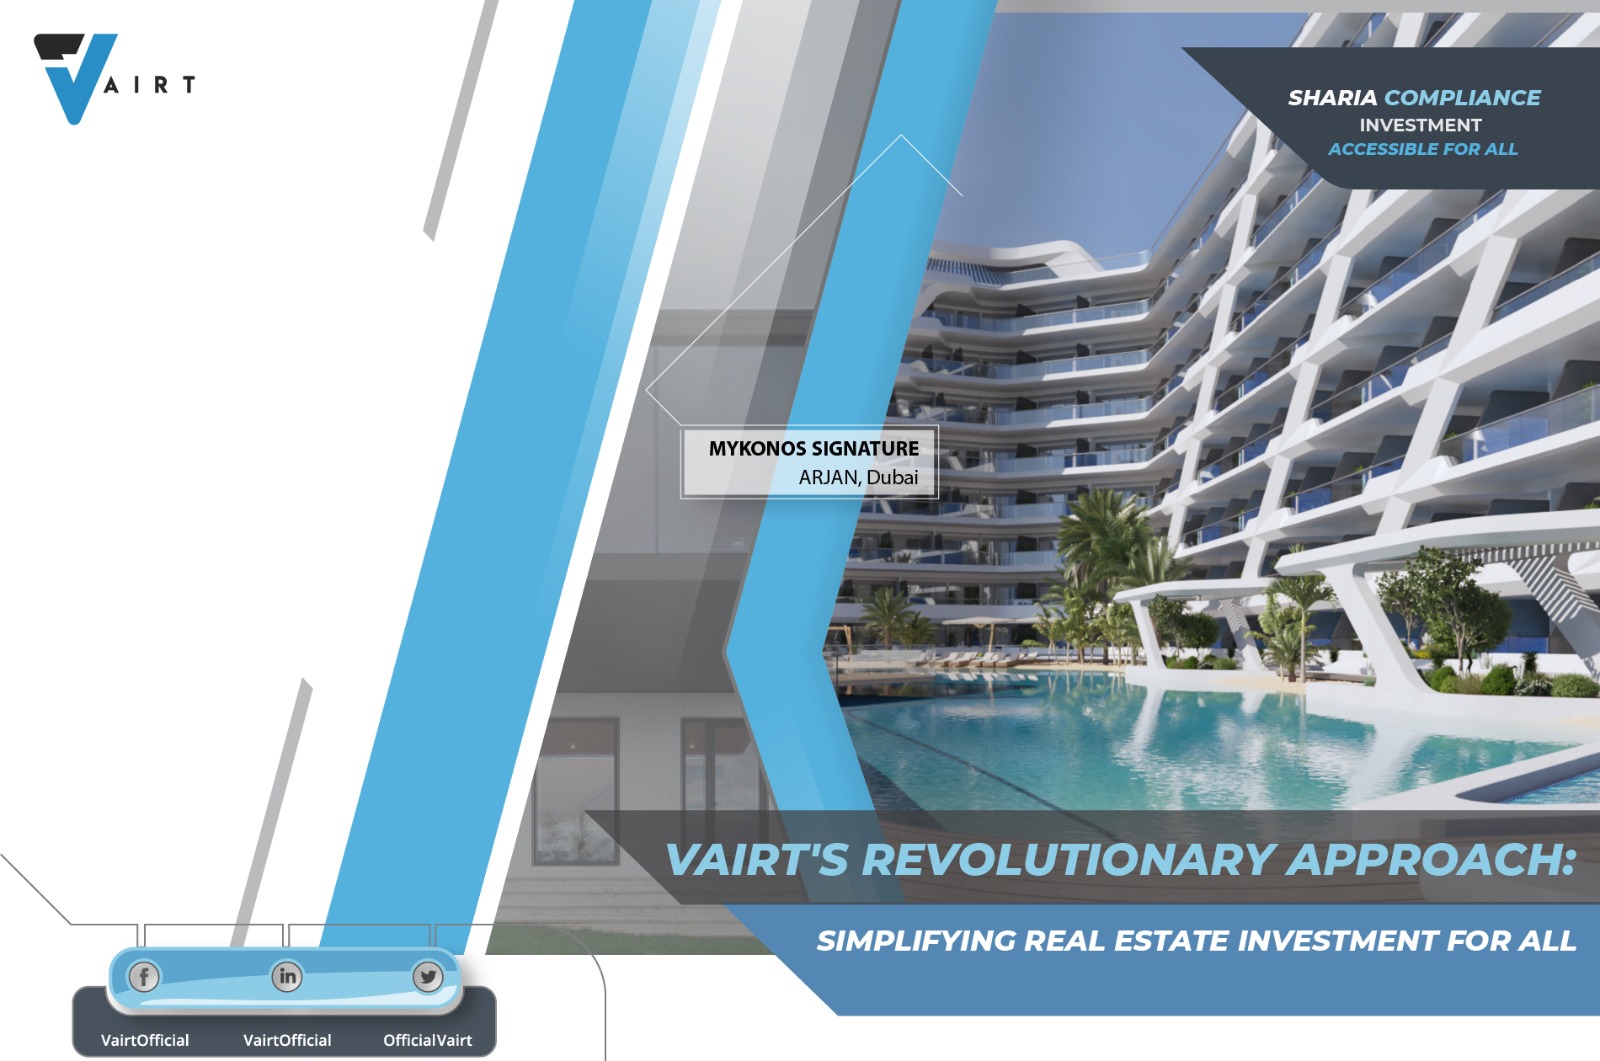 Vairt's Revolutionary Approach: Simplifying Real Estate Investment for All